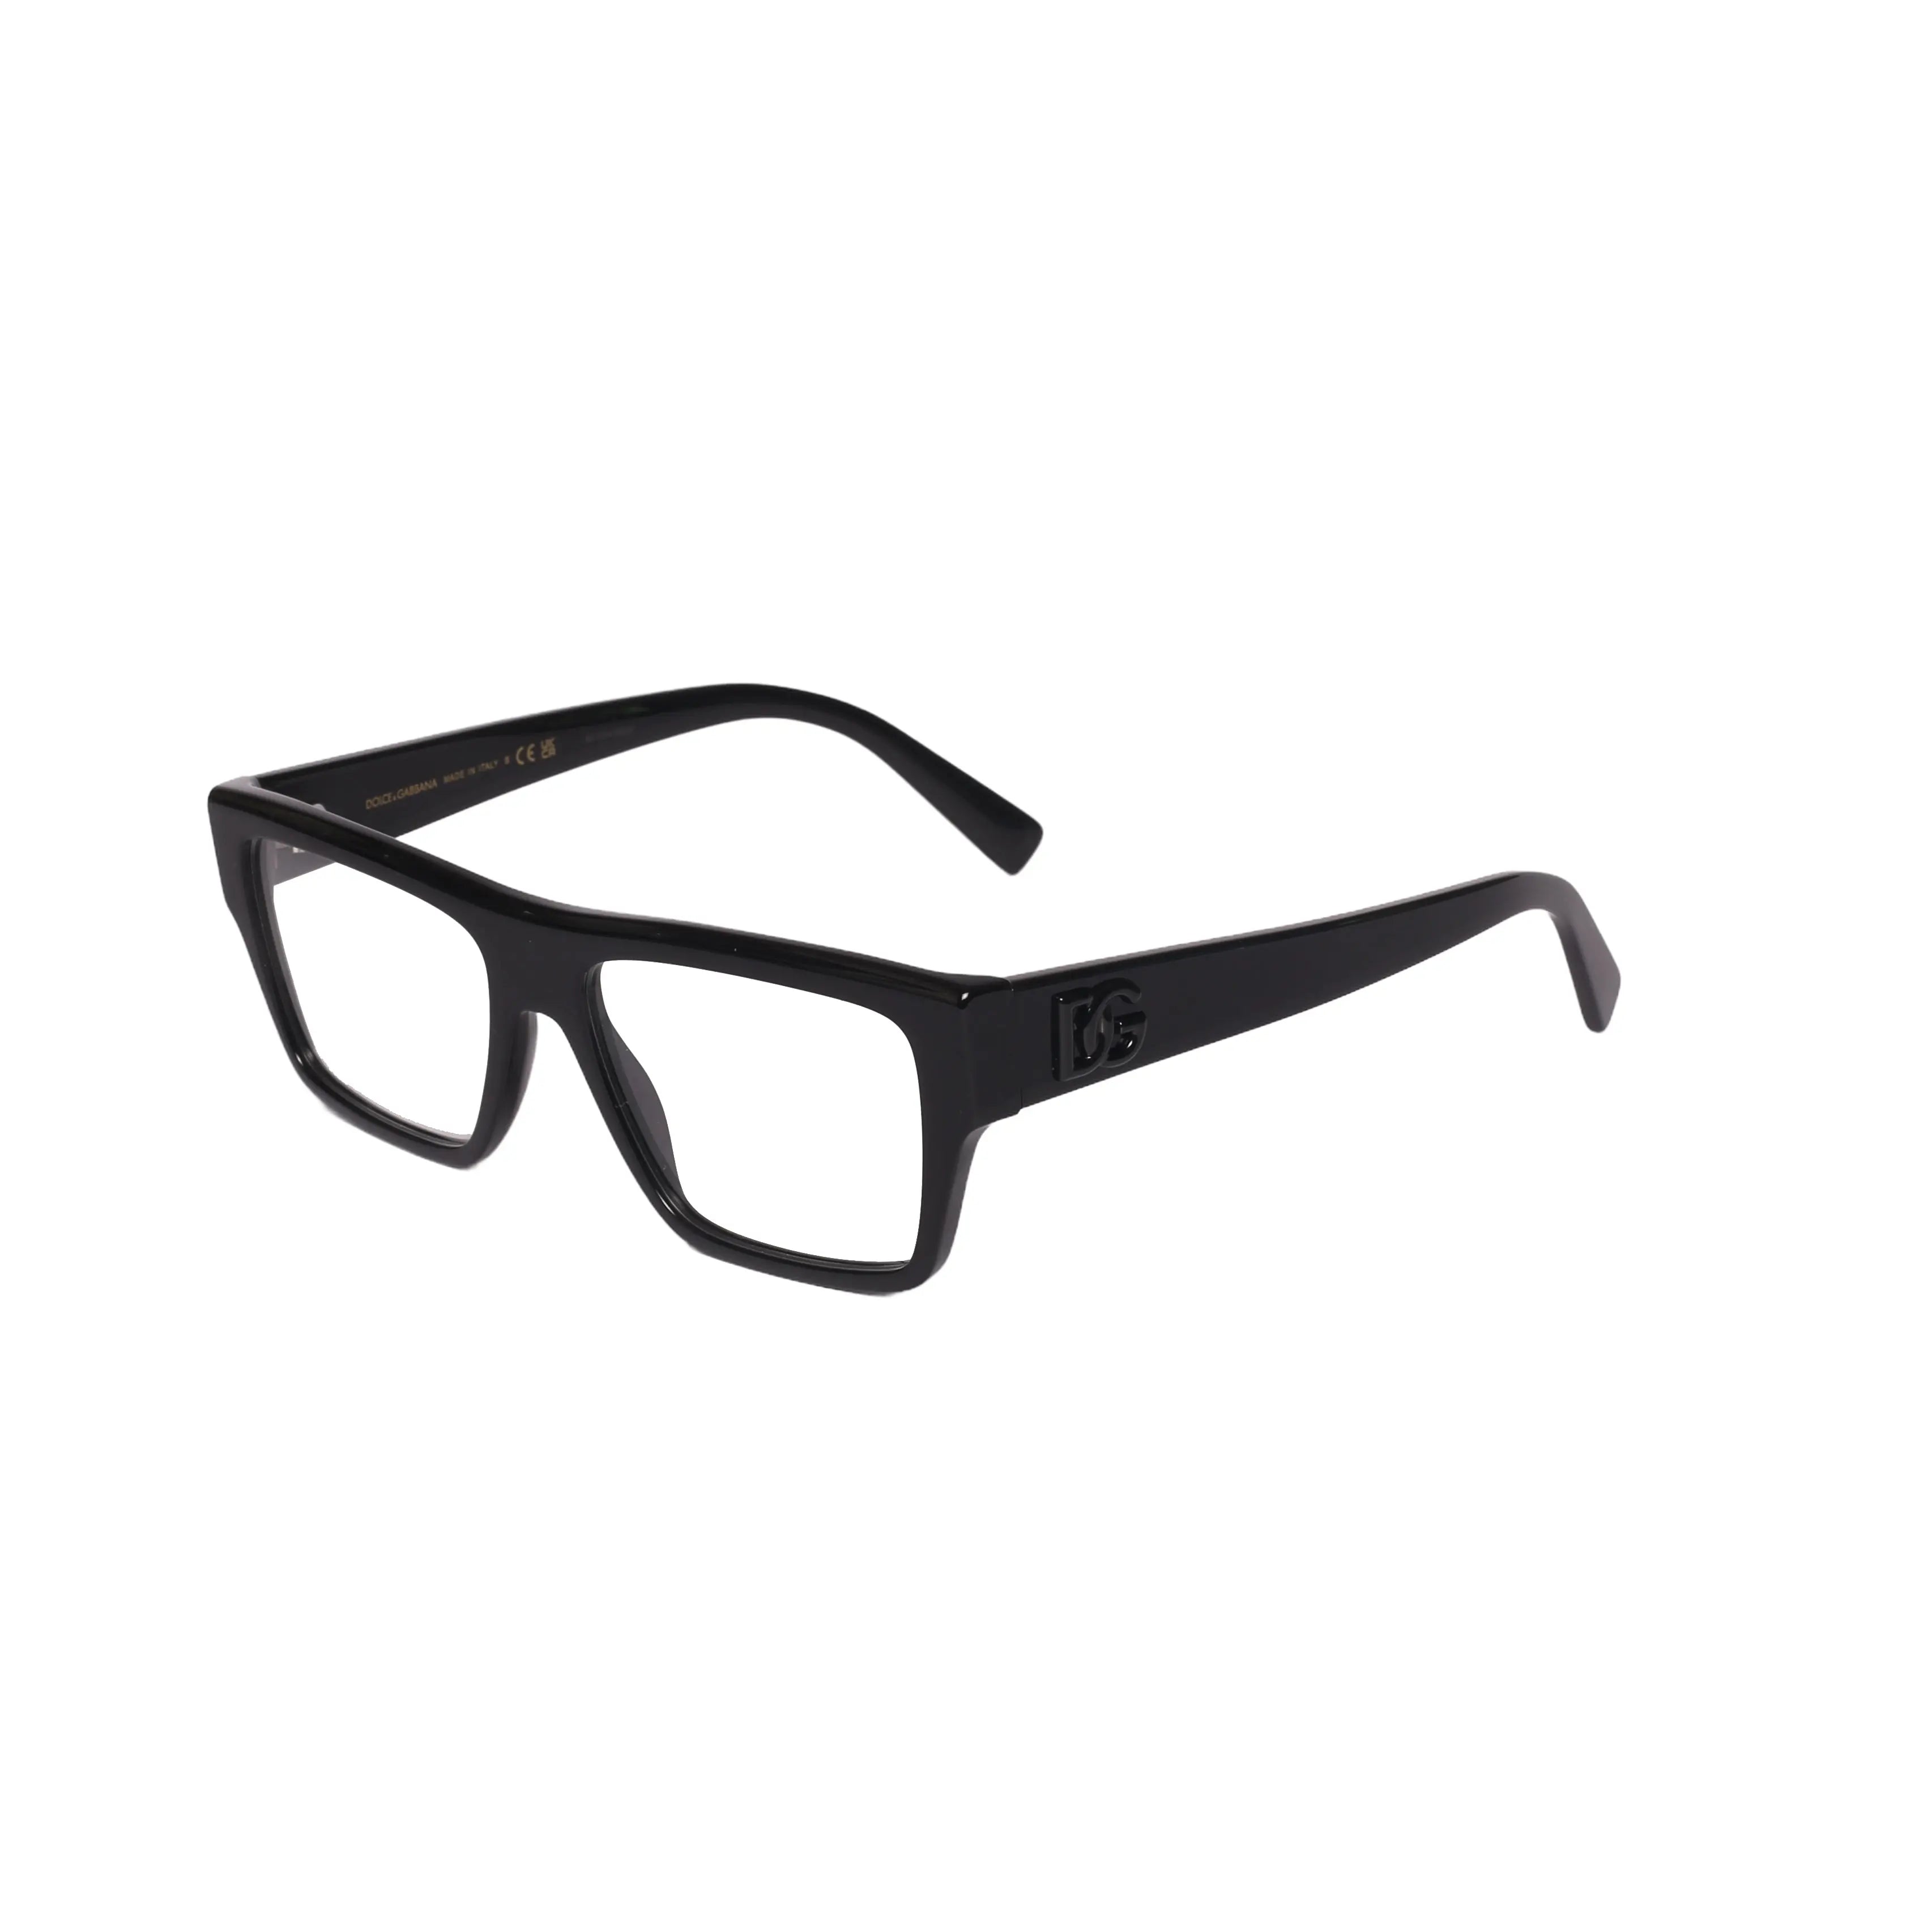 Dolce & Gabbana (D&G) DG 3382-53-5015 EyeglassesLook and feel remarkable in Dolce &amp; Gabbana's DG 3382-53-5015 eyeglasses. This stylish frame is perfect for a confident expression and will make you stand out frEyeglasses